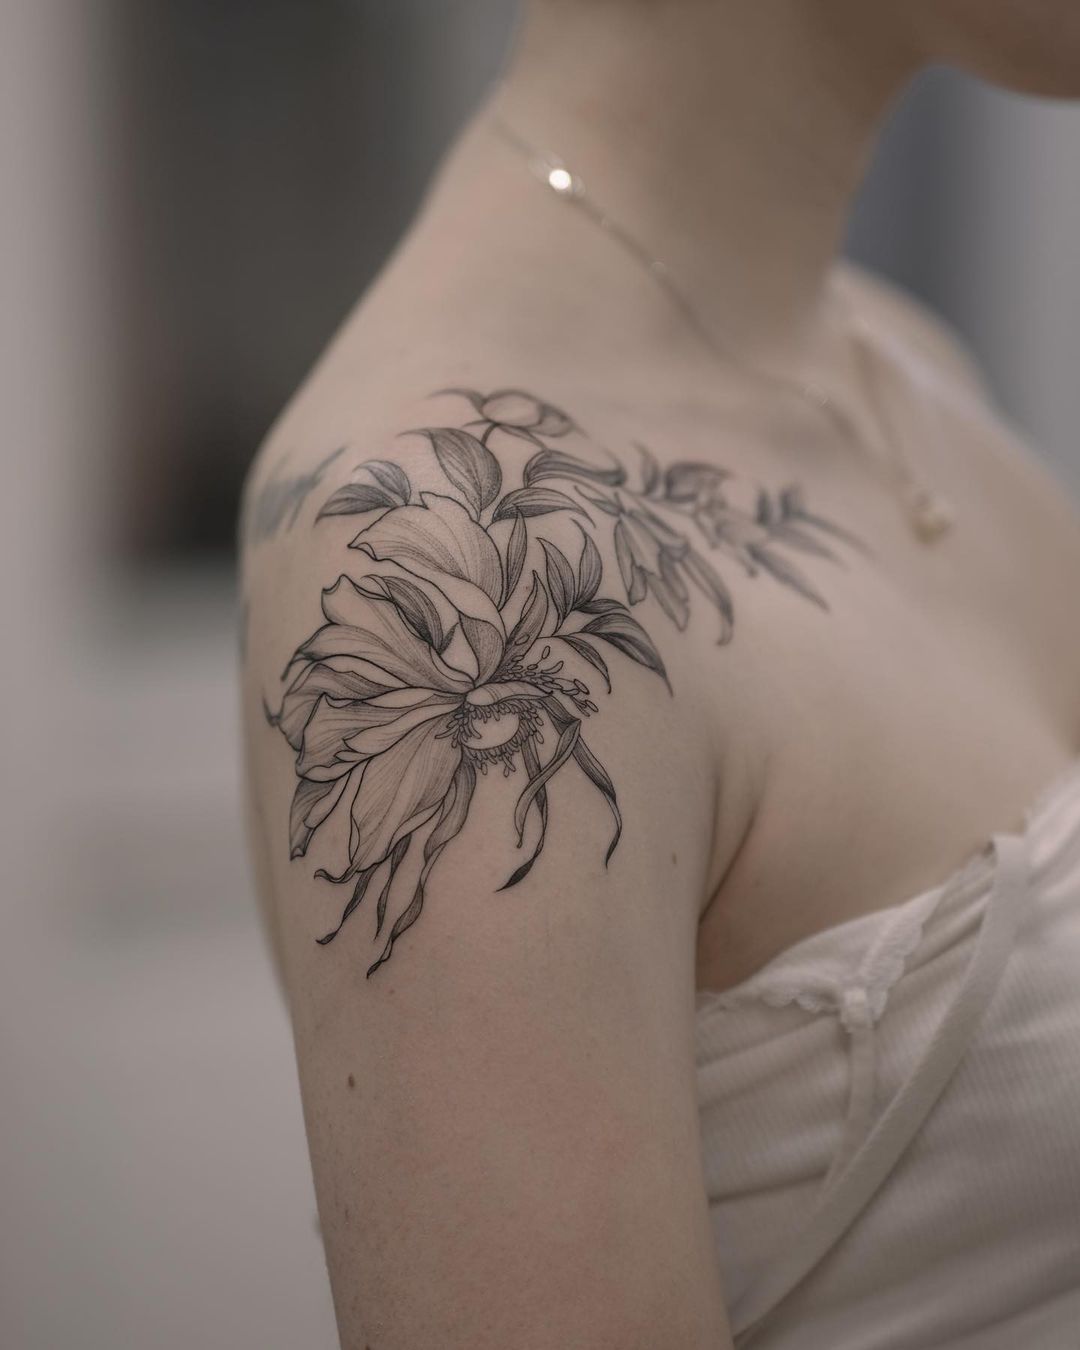 Delicate flower tattoos for girls by Roman Itchev | iNKPPL